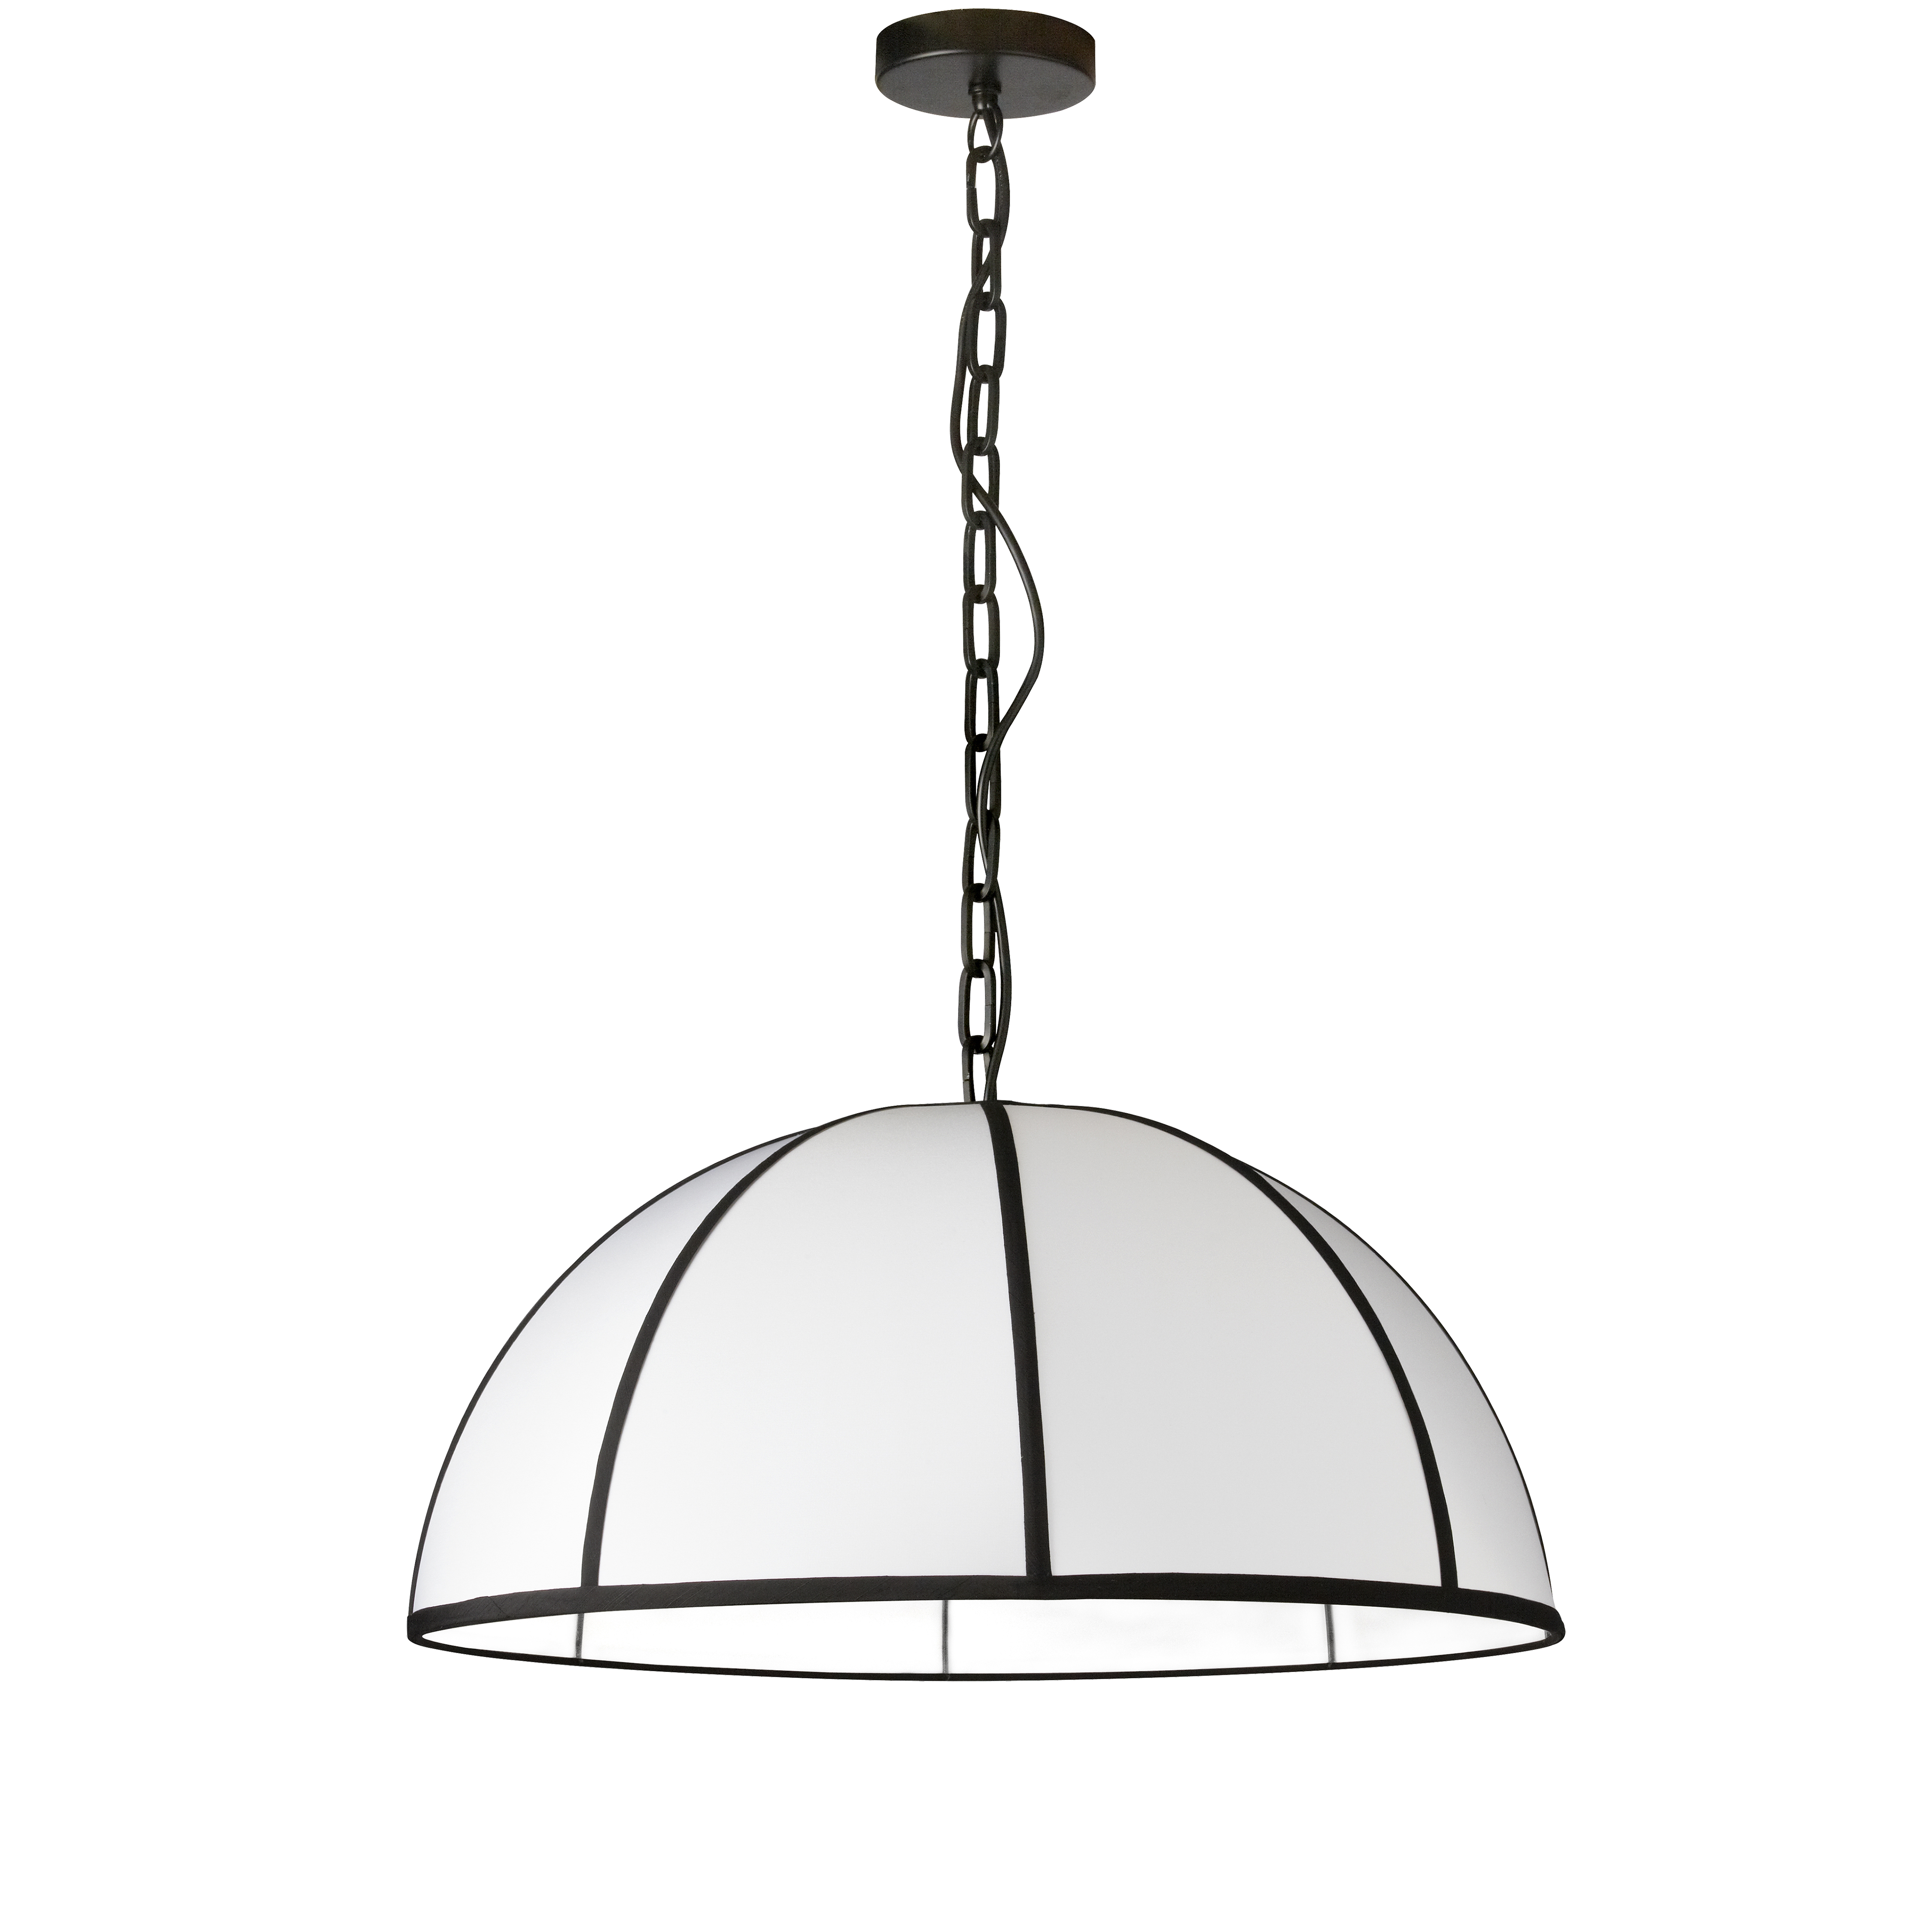 Attention to detail creates a fashion statement out of the classic drum shape in the Portobello family of lighting. Like its culinary namesake, the generous proportions of an inverted drum shape gives Portobello lighting a spacious feel. The metal frame in matte black matches trim that creates a segmented look on the fabric shade. A variety of fabric color options add a captivating contrast to the design. Available in a variety of sizes, and with its classic look, Portobello lighting is suitable for kitchens, living rooms and office spaces.